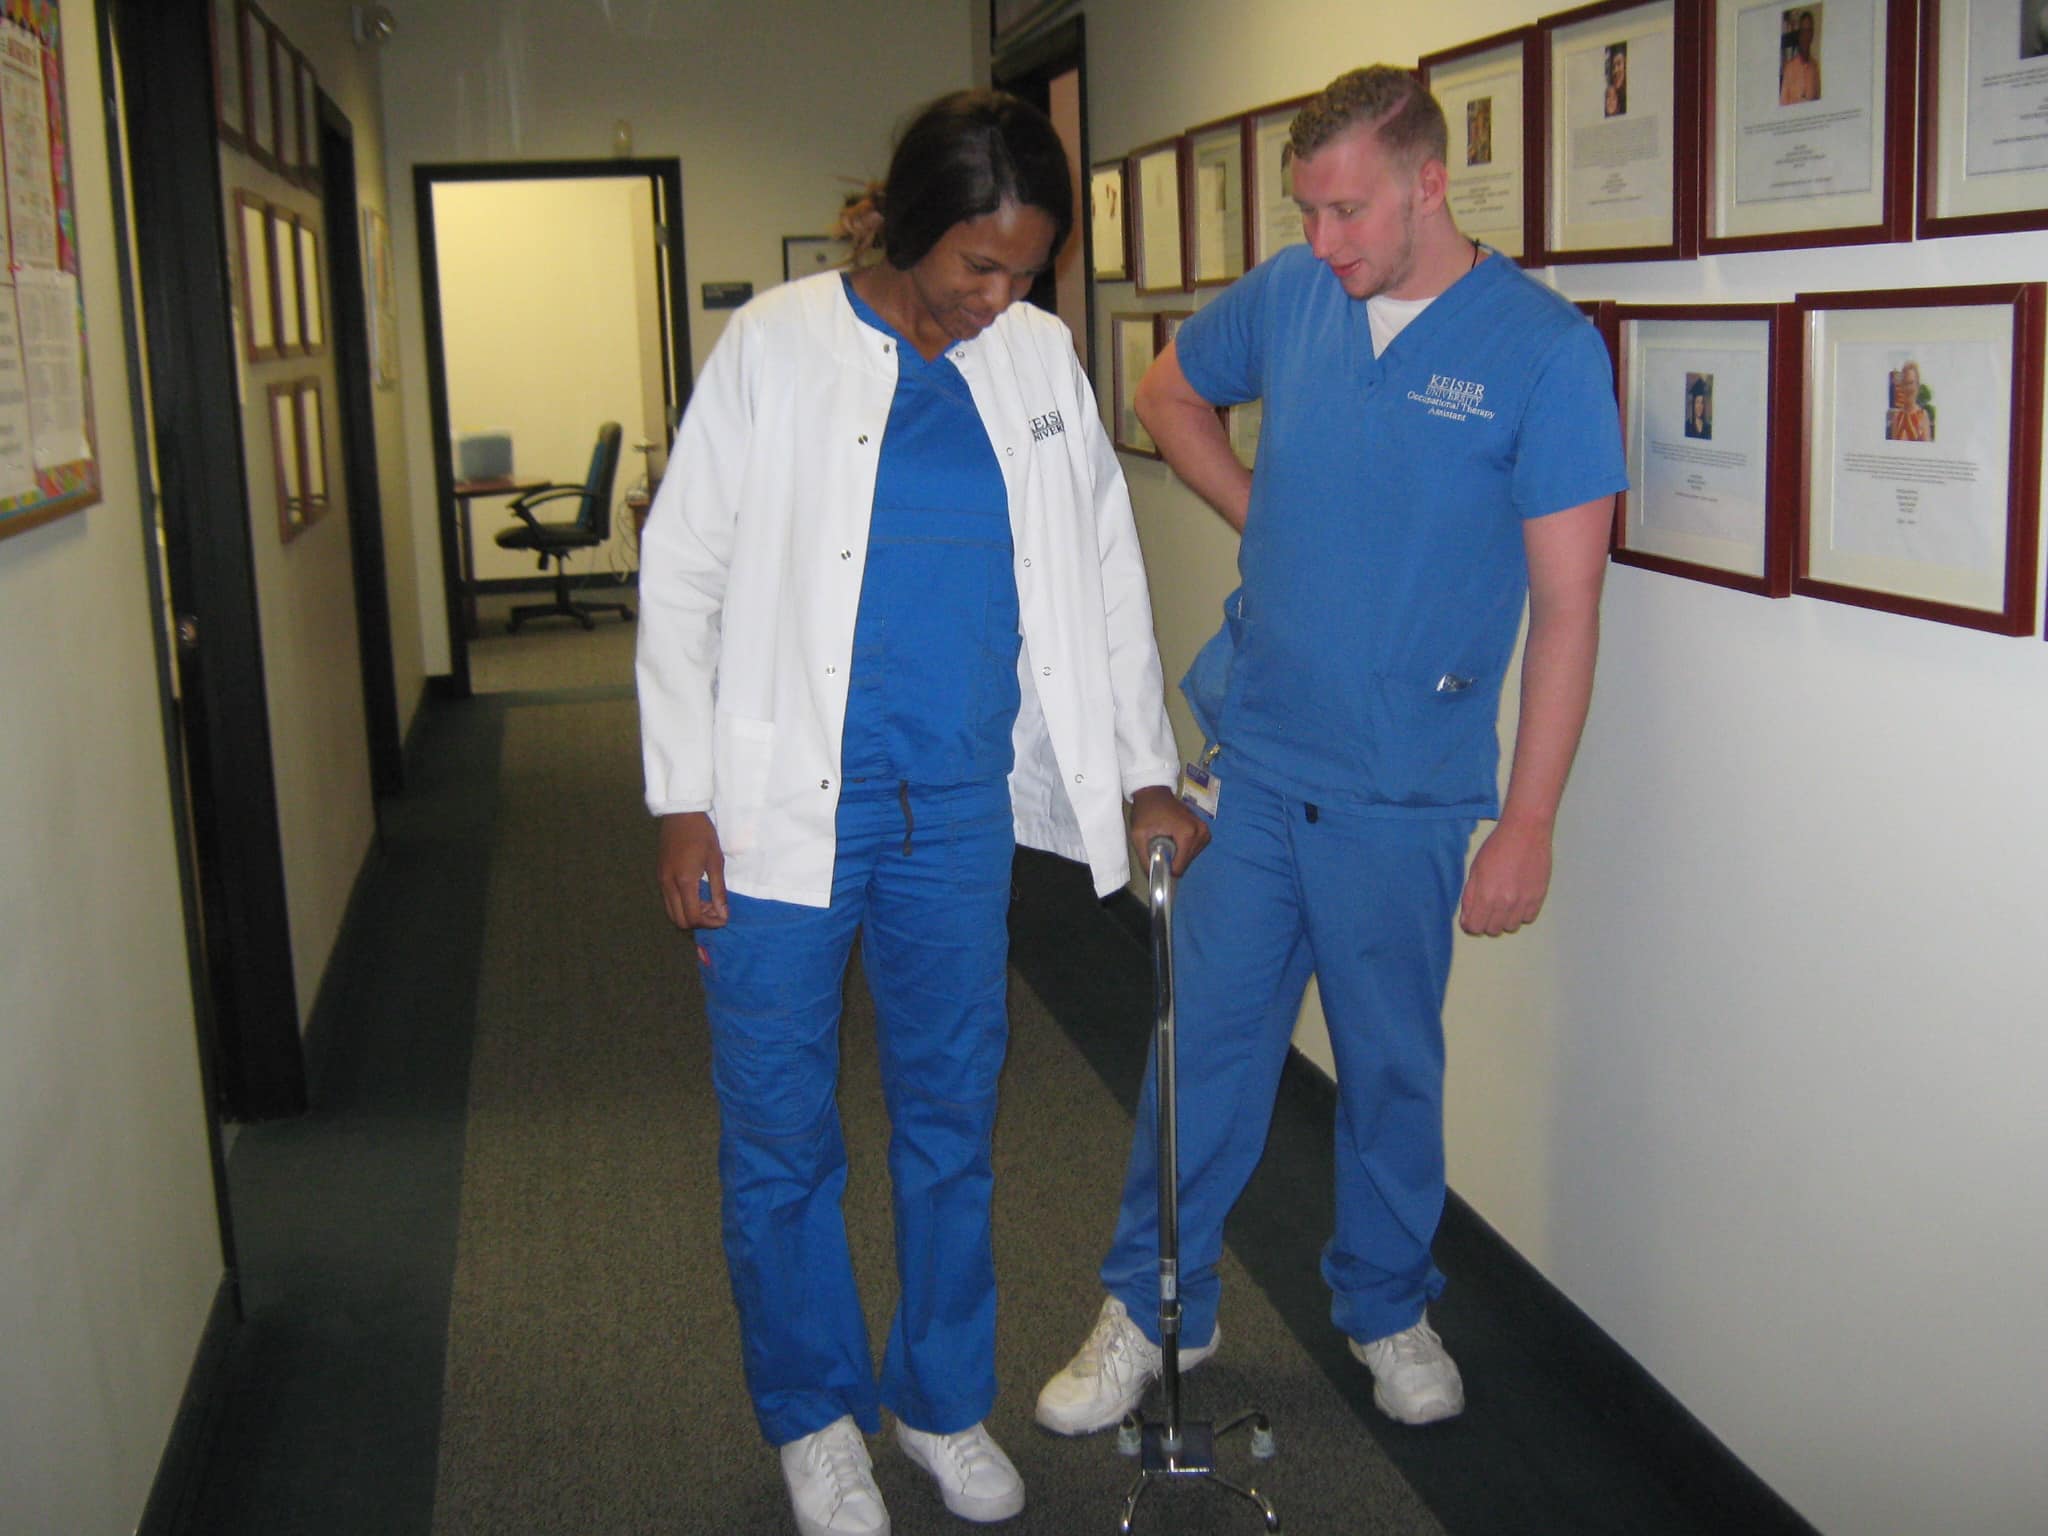 Occupational Therapy Assistant Students at the Daytona Beach Campus Learn About Ambulation